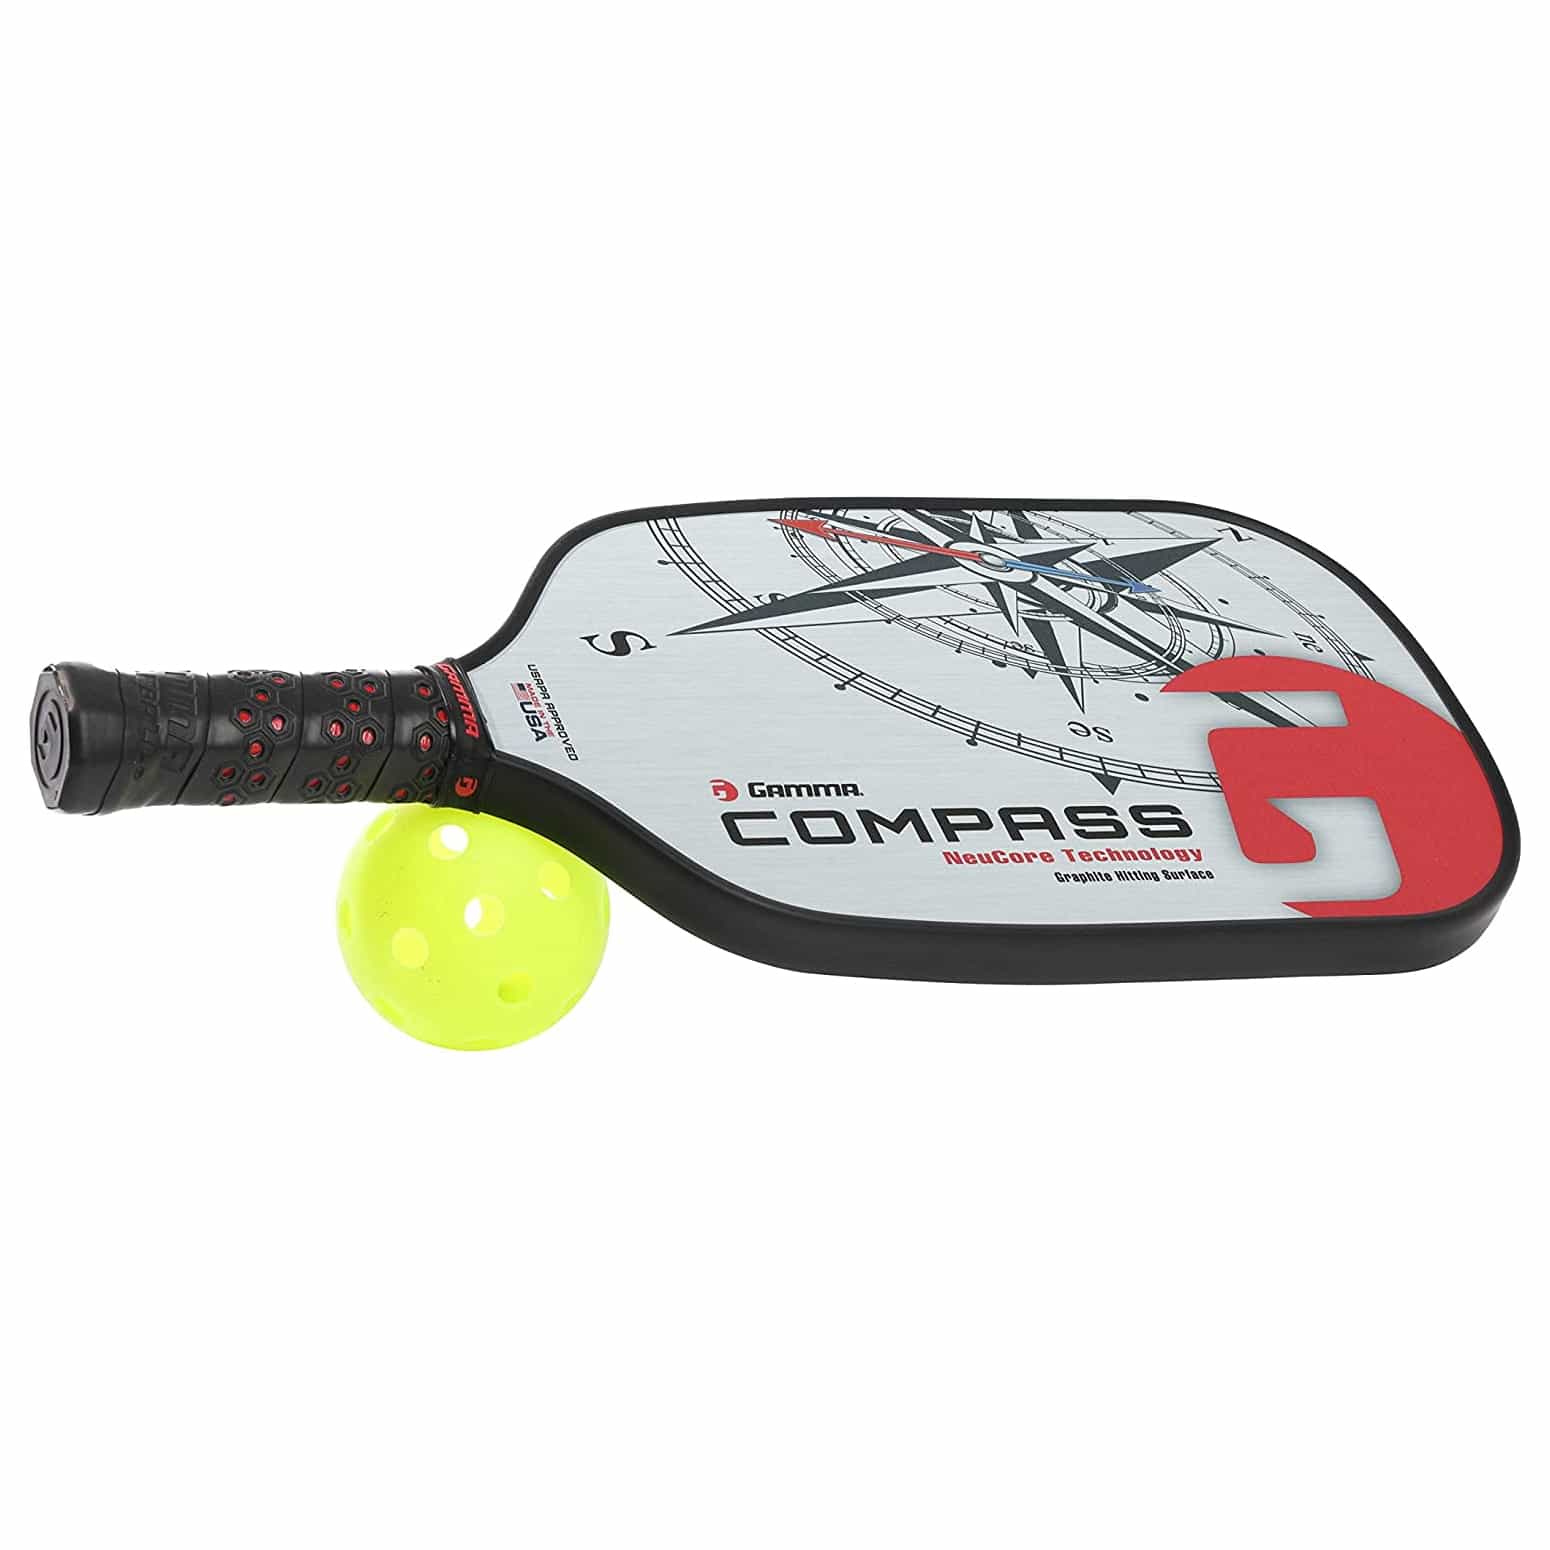 GAMMA Neutron 2.0 Pickleball Paddle WY 17 03 for sale online 